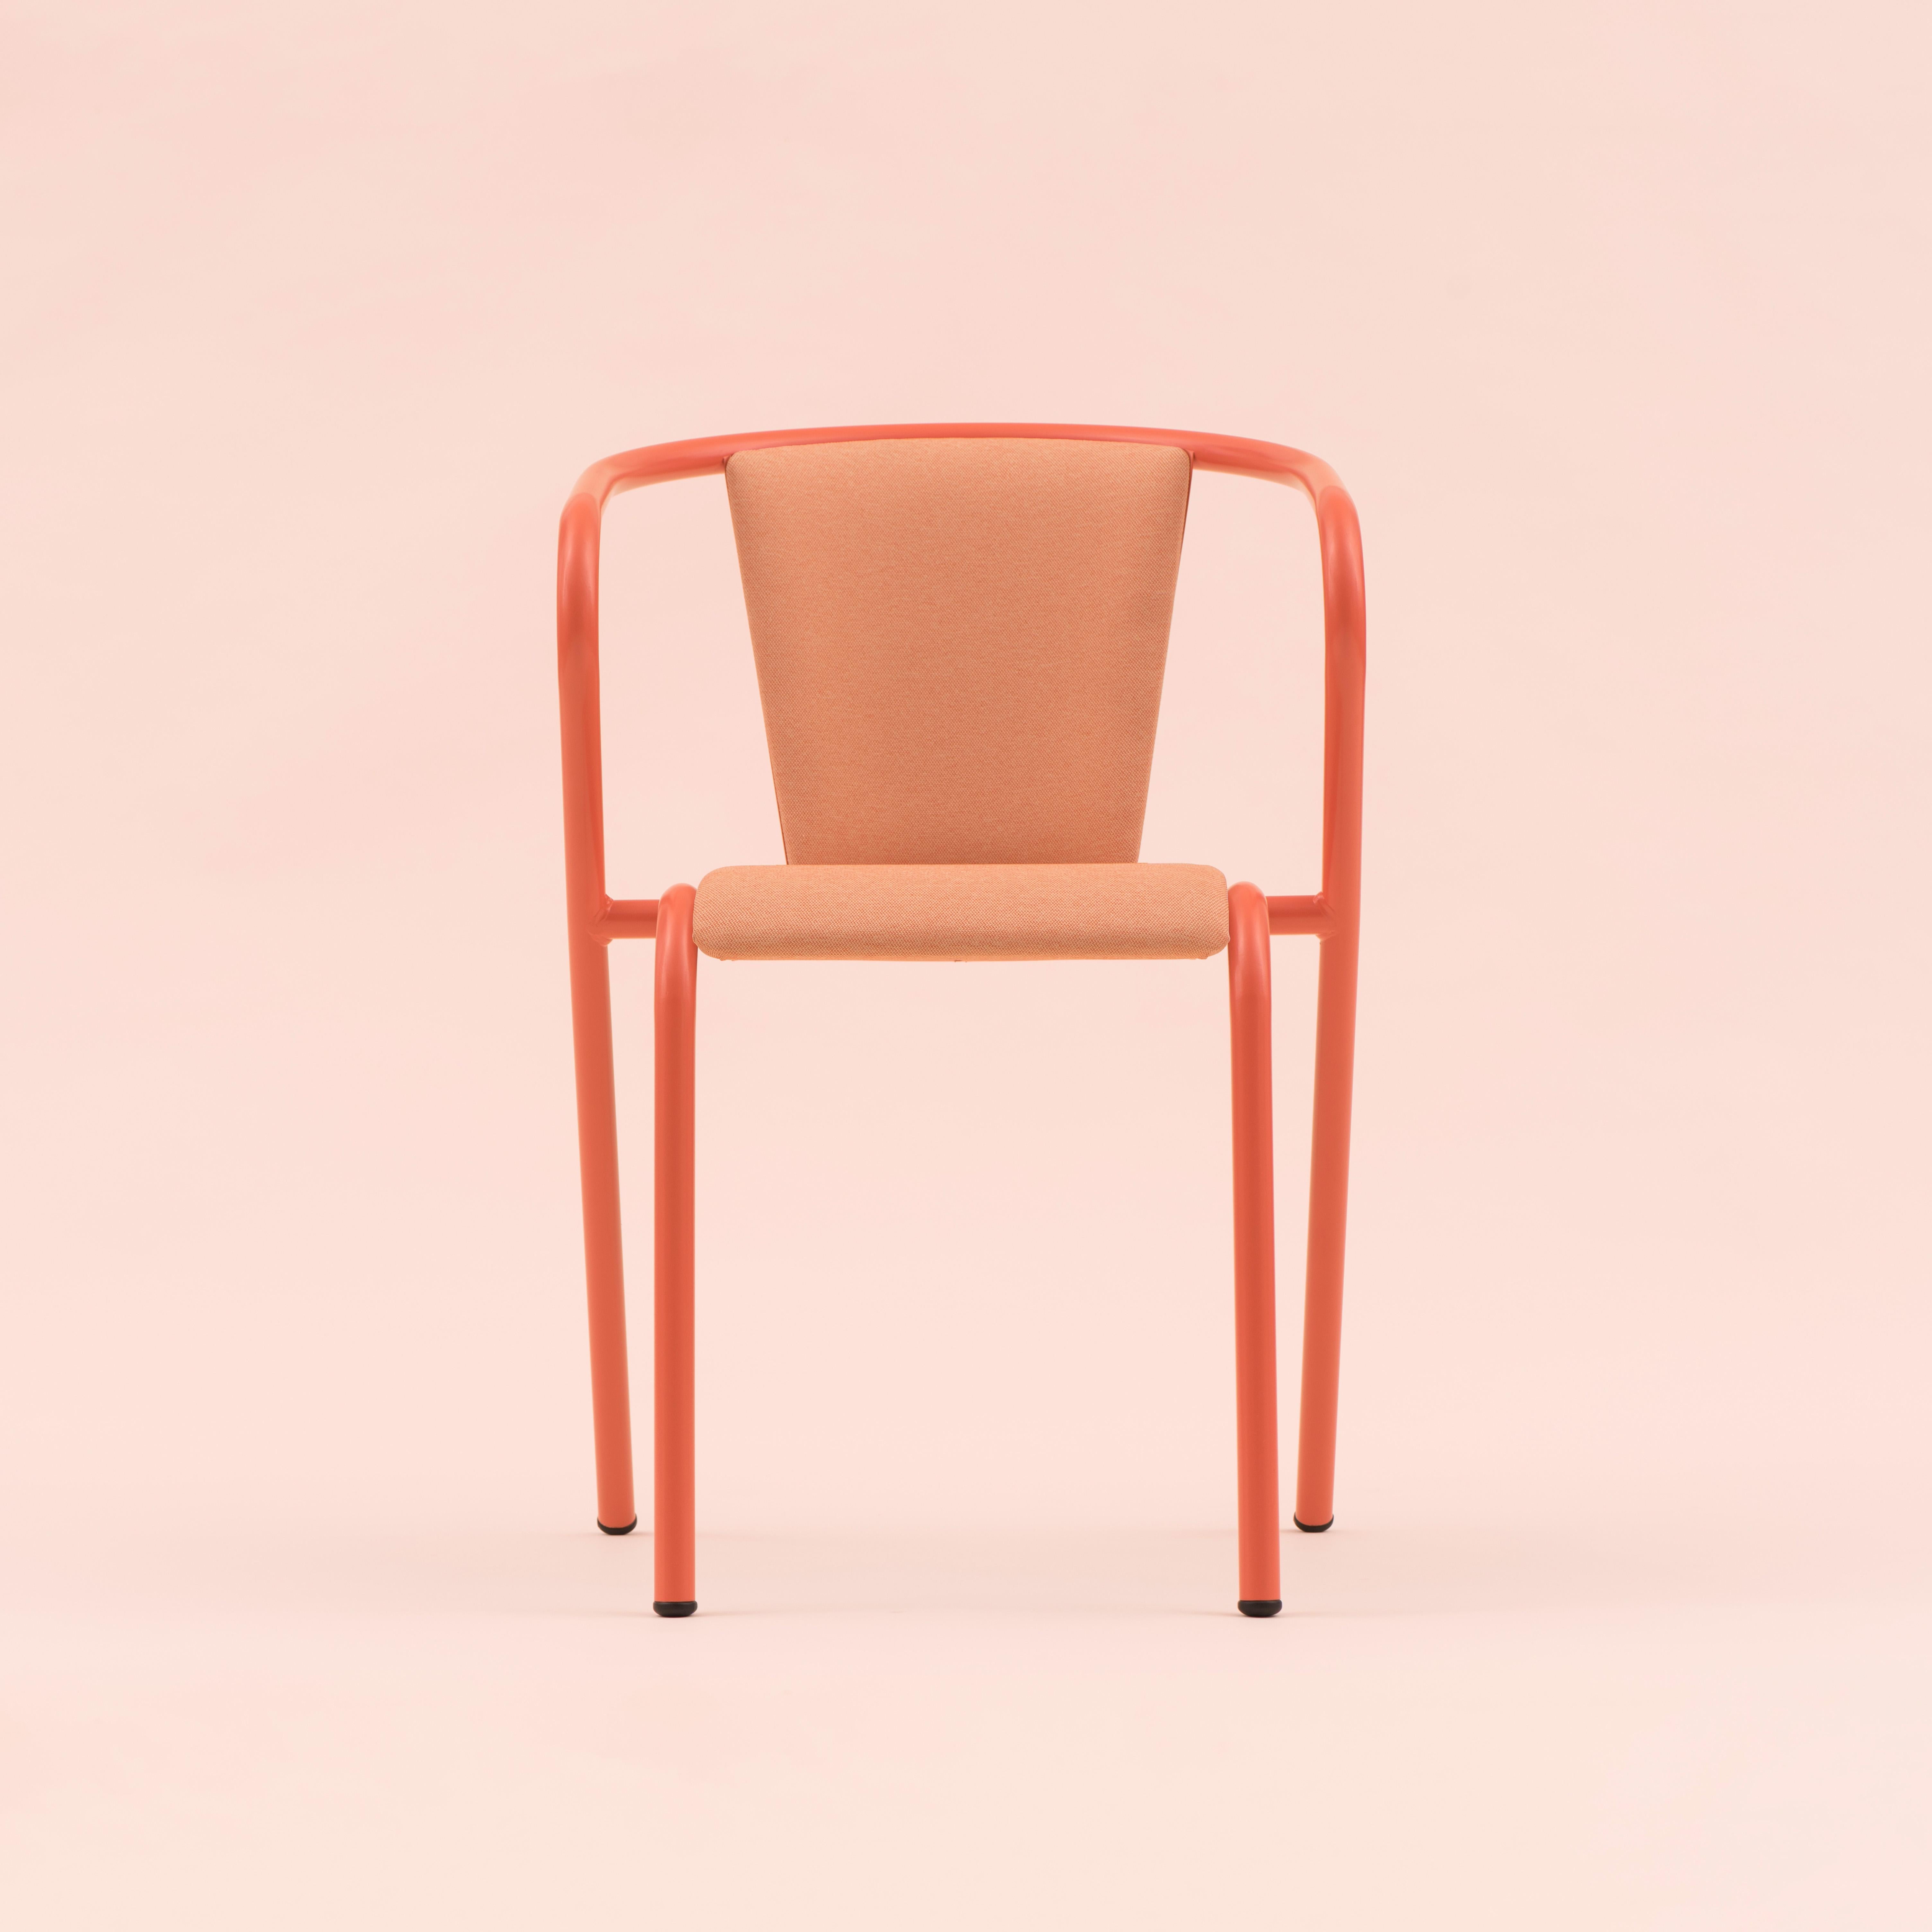 Powder-Coated BICAchair Modern Steel Armchair Salmon Pink, Upholstery in Eco-Fabric For Sale